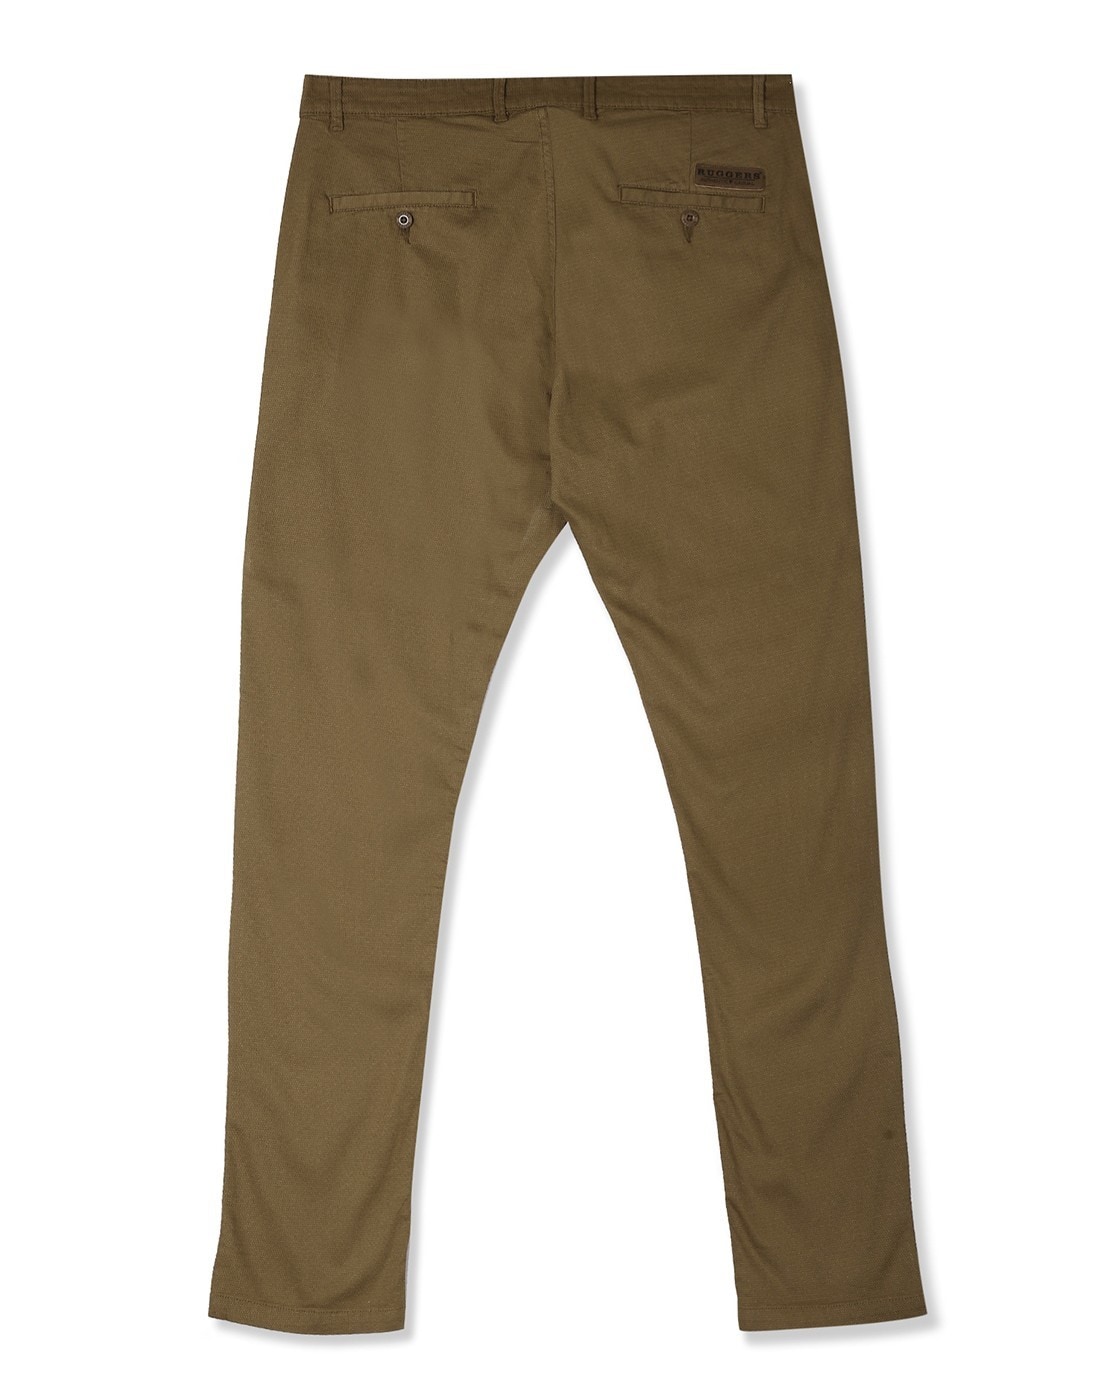 Buy Root by Ruggers by Unlimited Mens Chinos online  Looksgudin